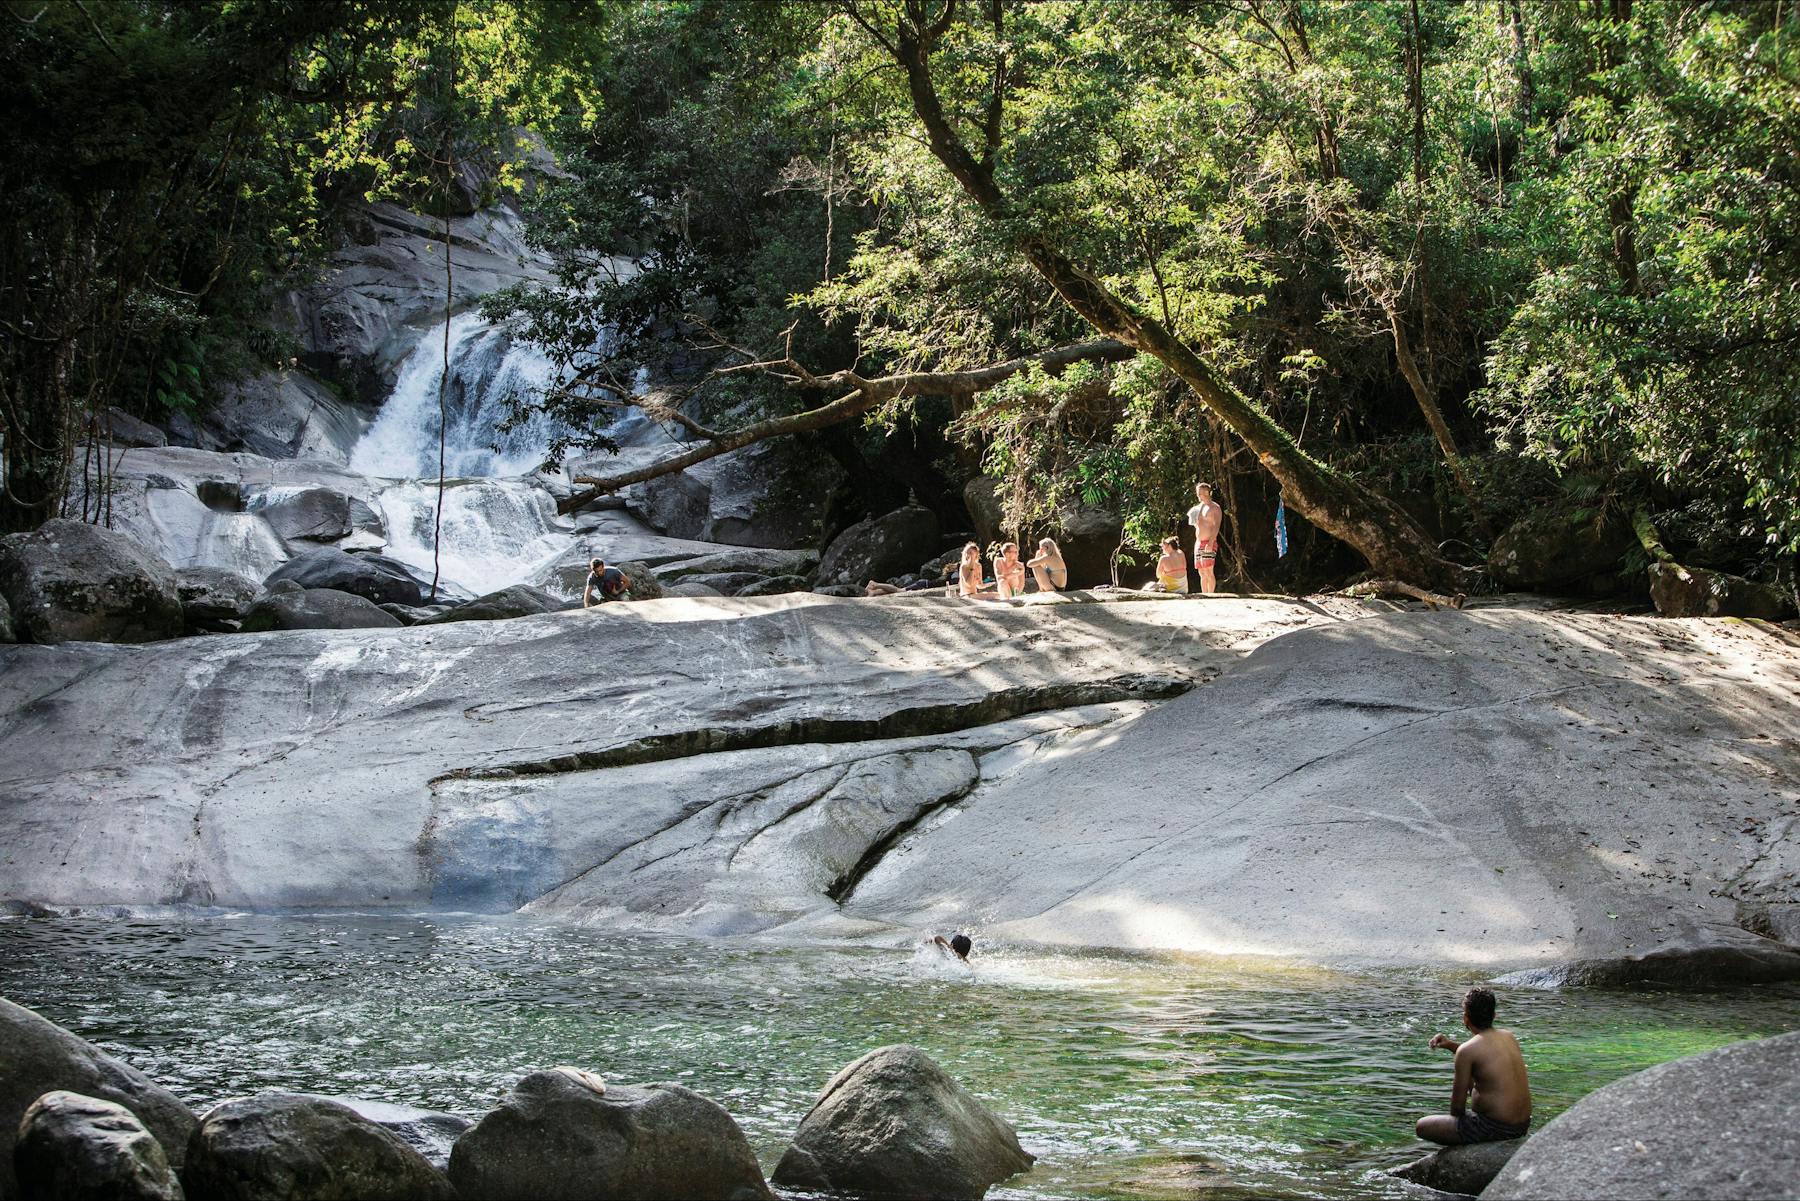 People on rock above bottom pool with waterfall in background.